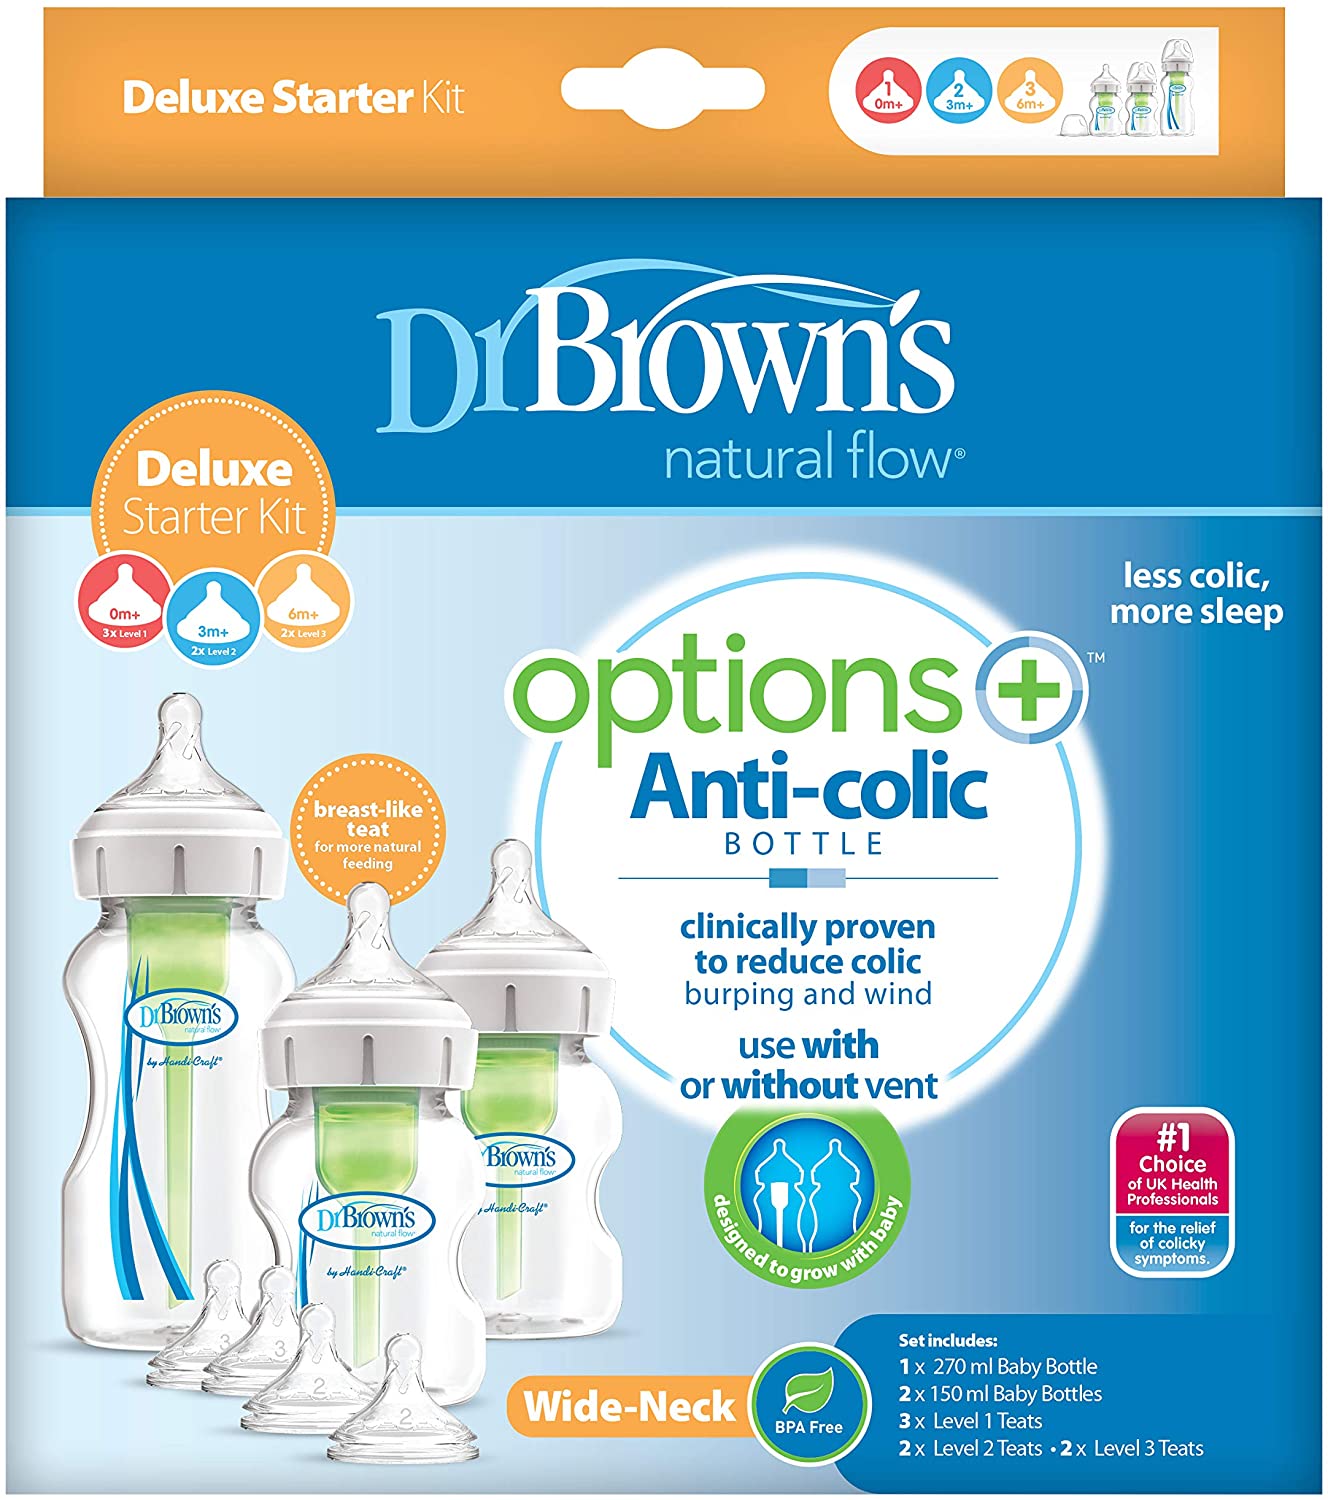 Dr.Brown's Wide-Neck Options+ Deluxe Starter Kit   (1x270 ml & 2x150 ml bottles, 2x L2 & L3 nipples, 2 cleaning brushes)